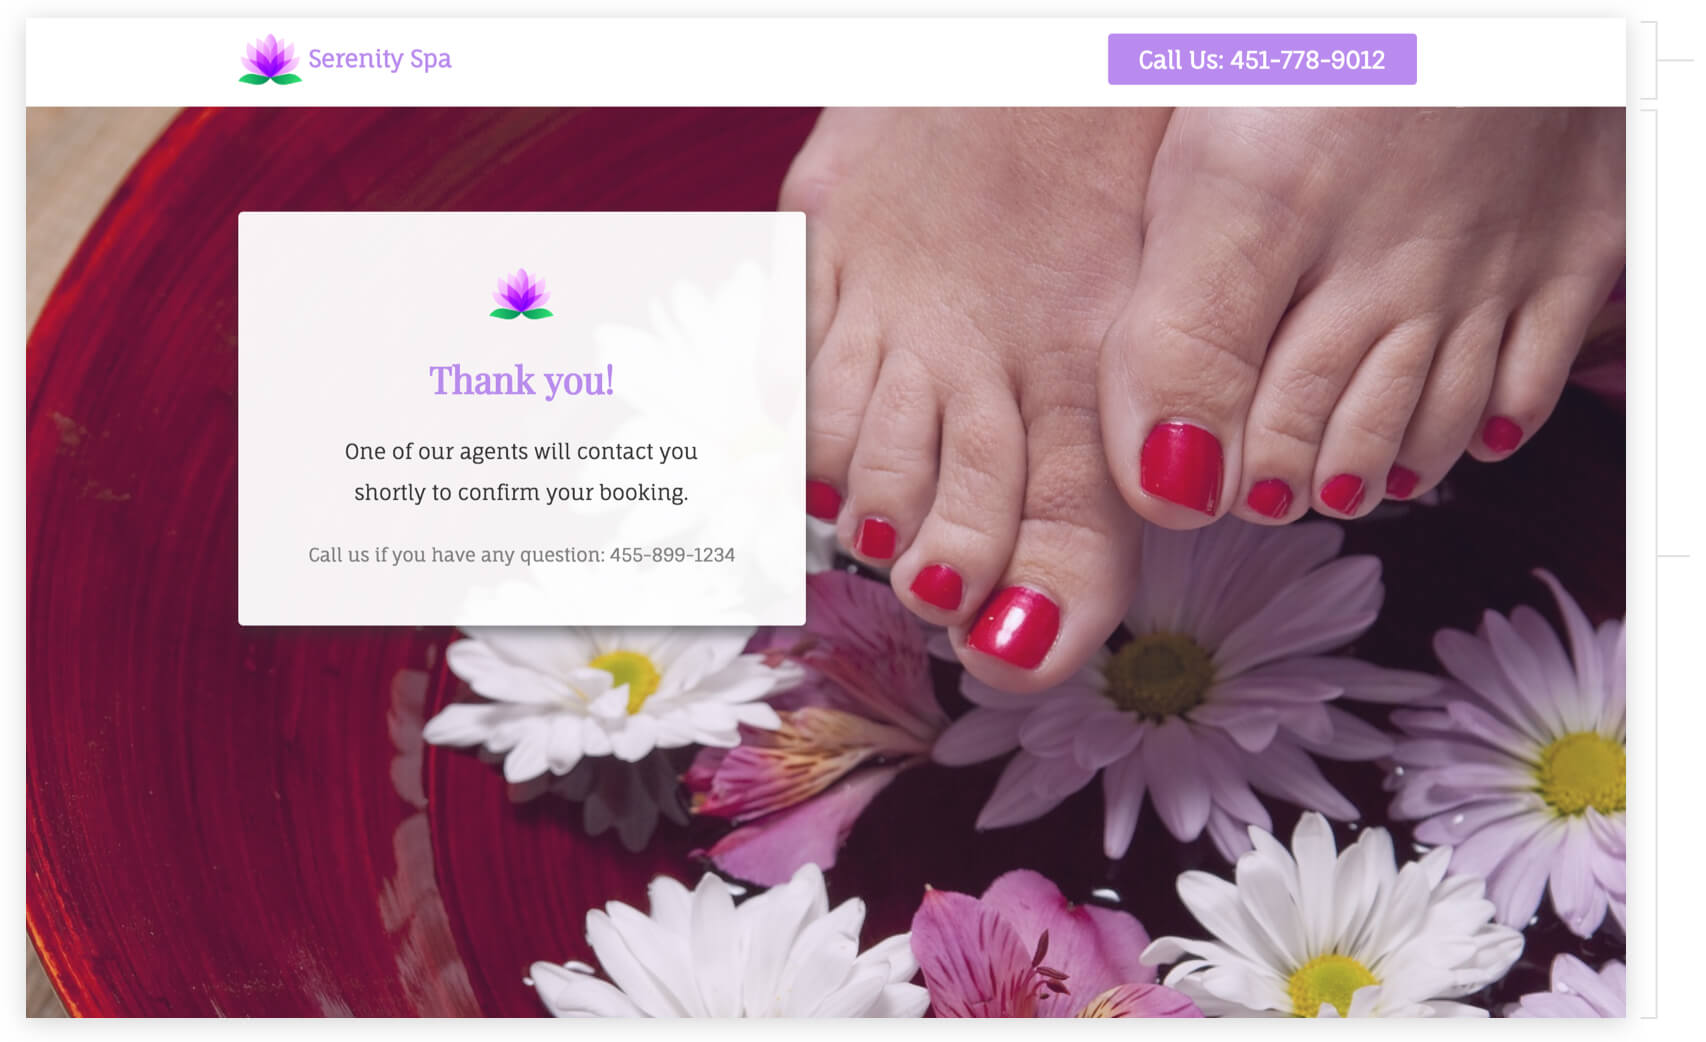 book pedicure thank you page